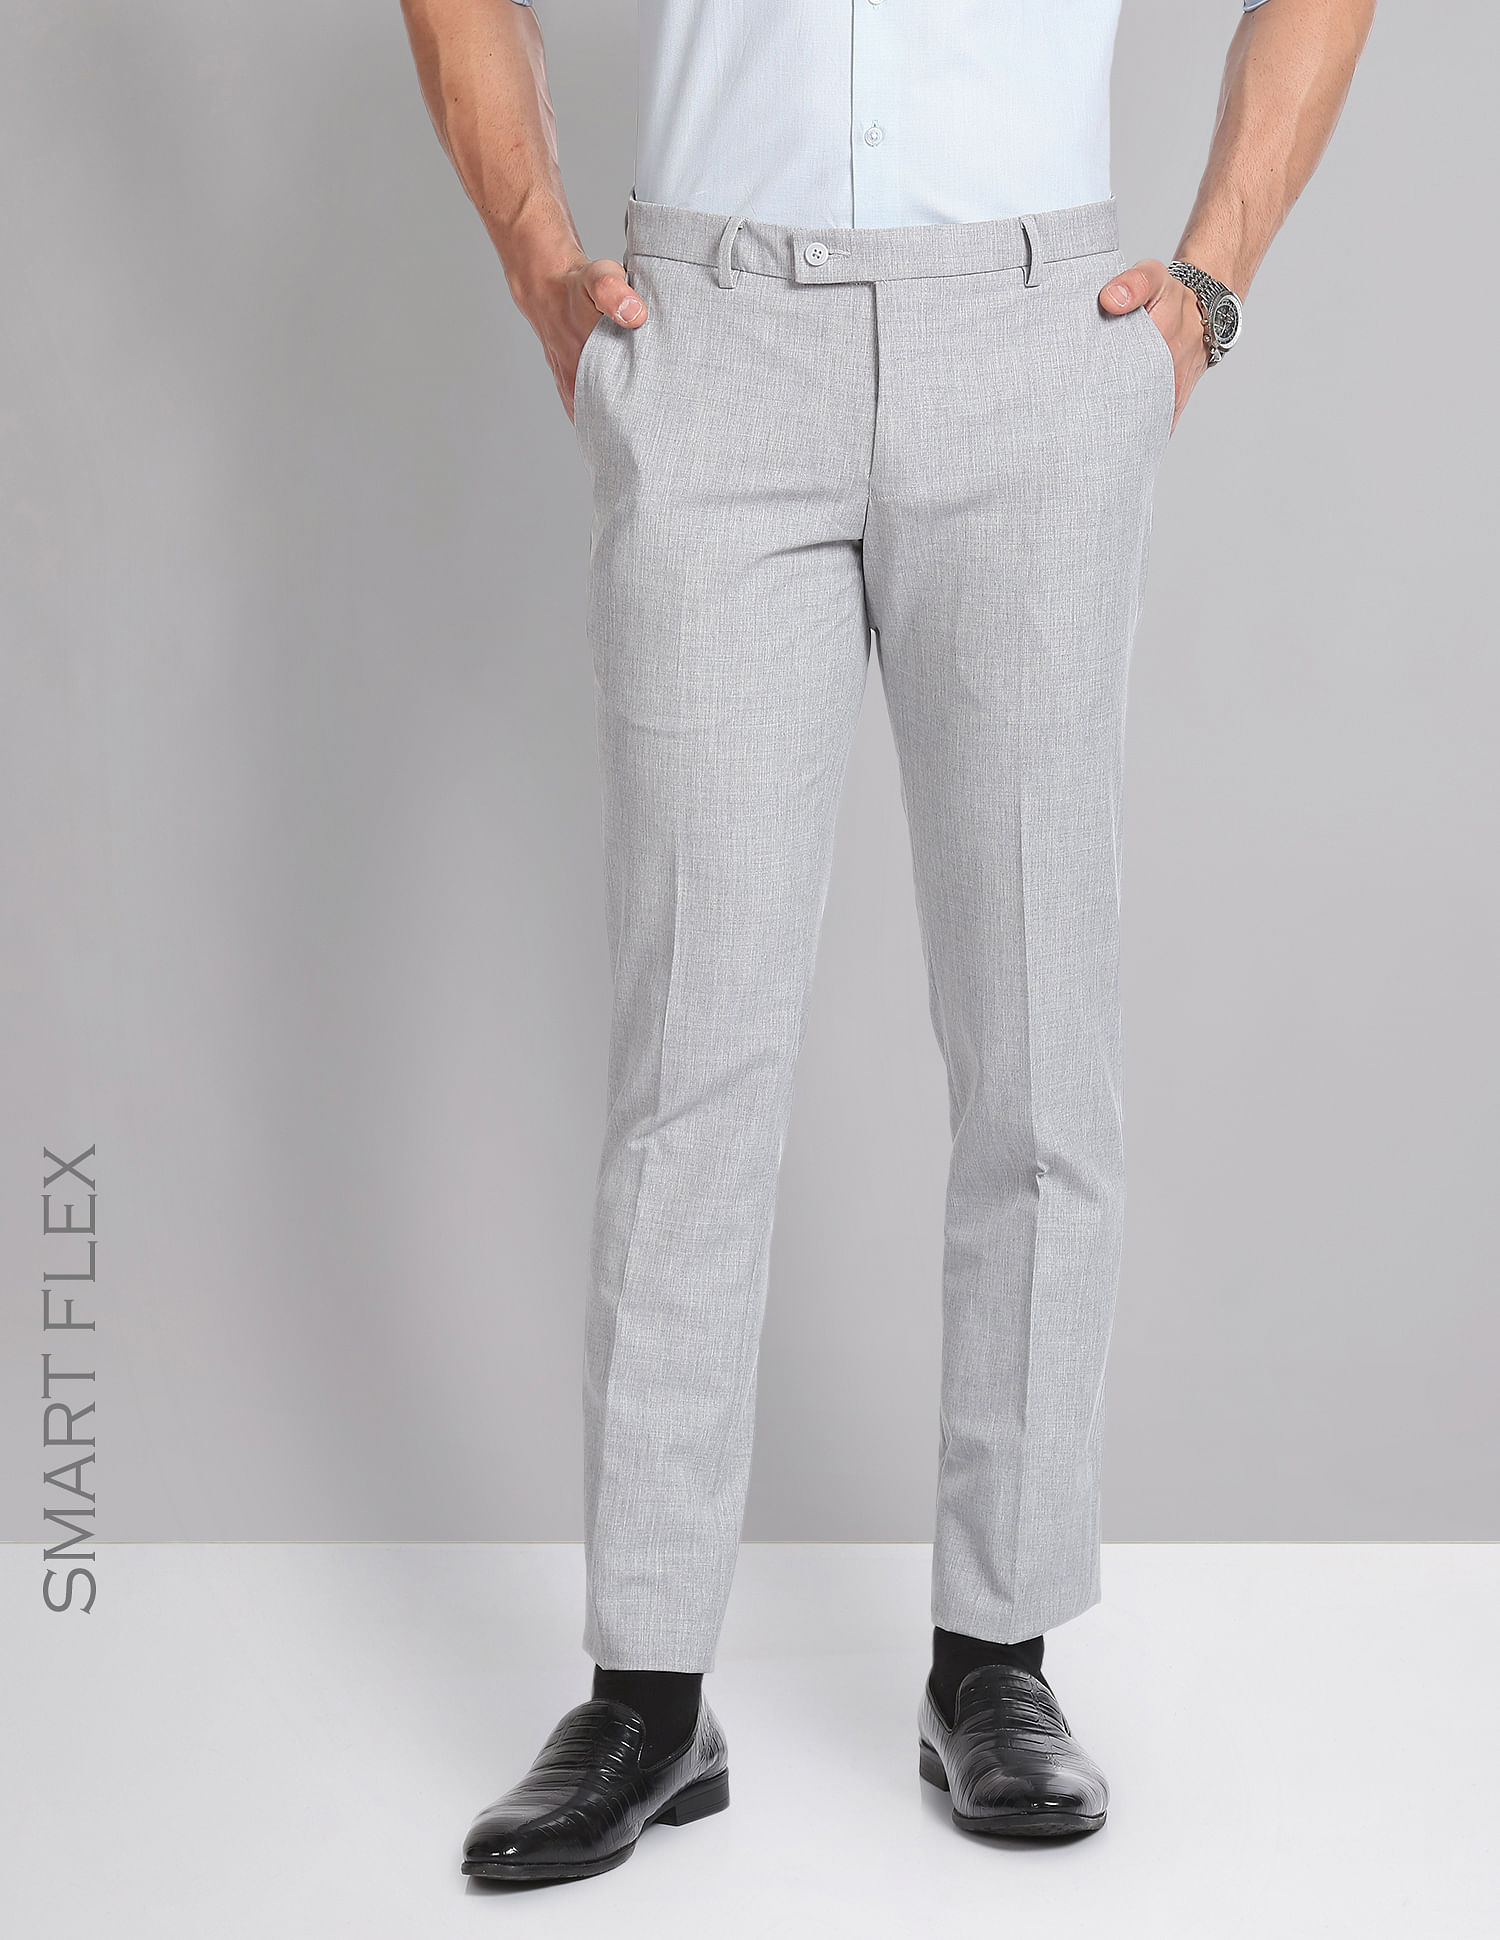 Buy Biagio Santaniello Light Grey Formal Trousers Online  484797  The  Collective